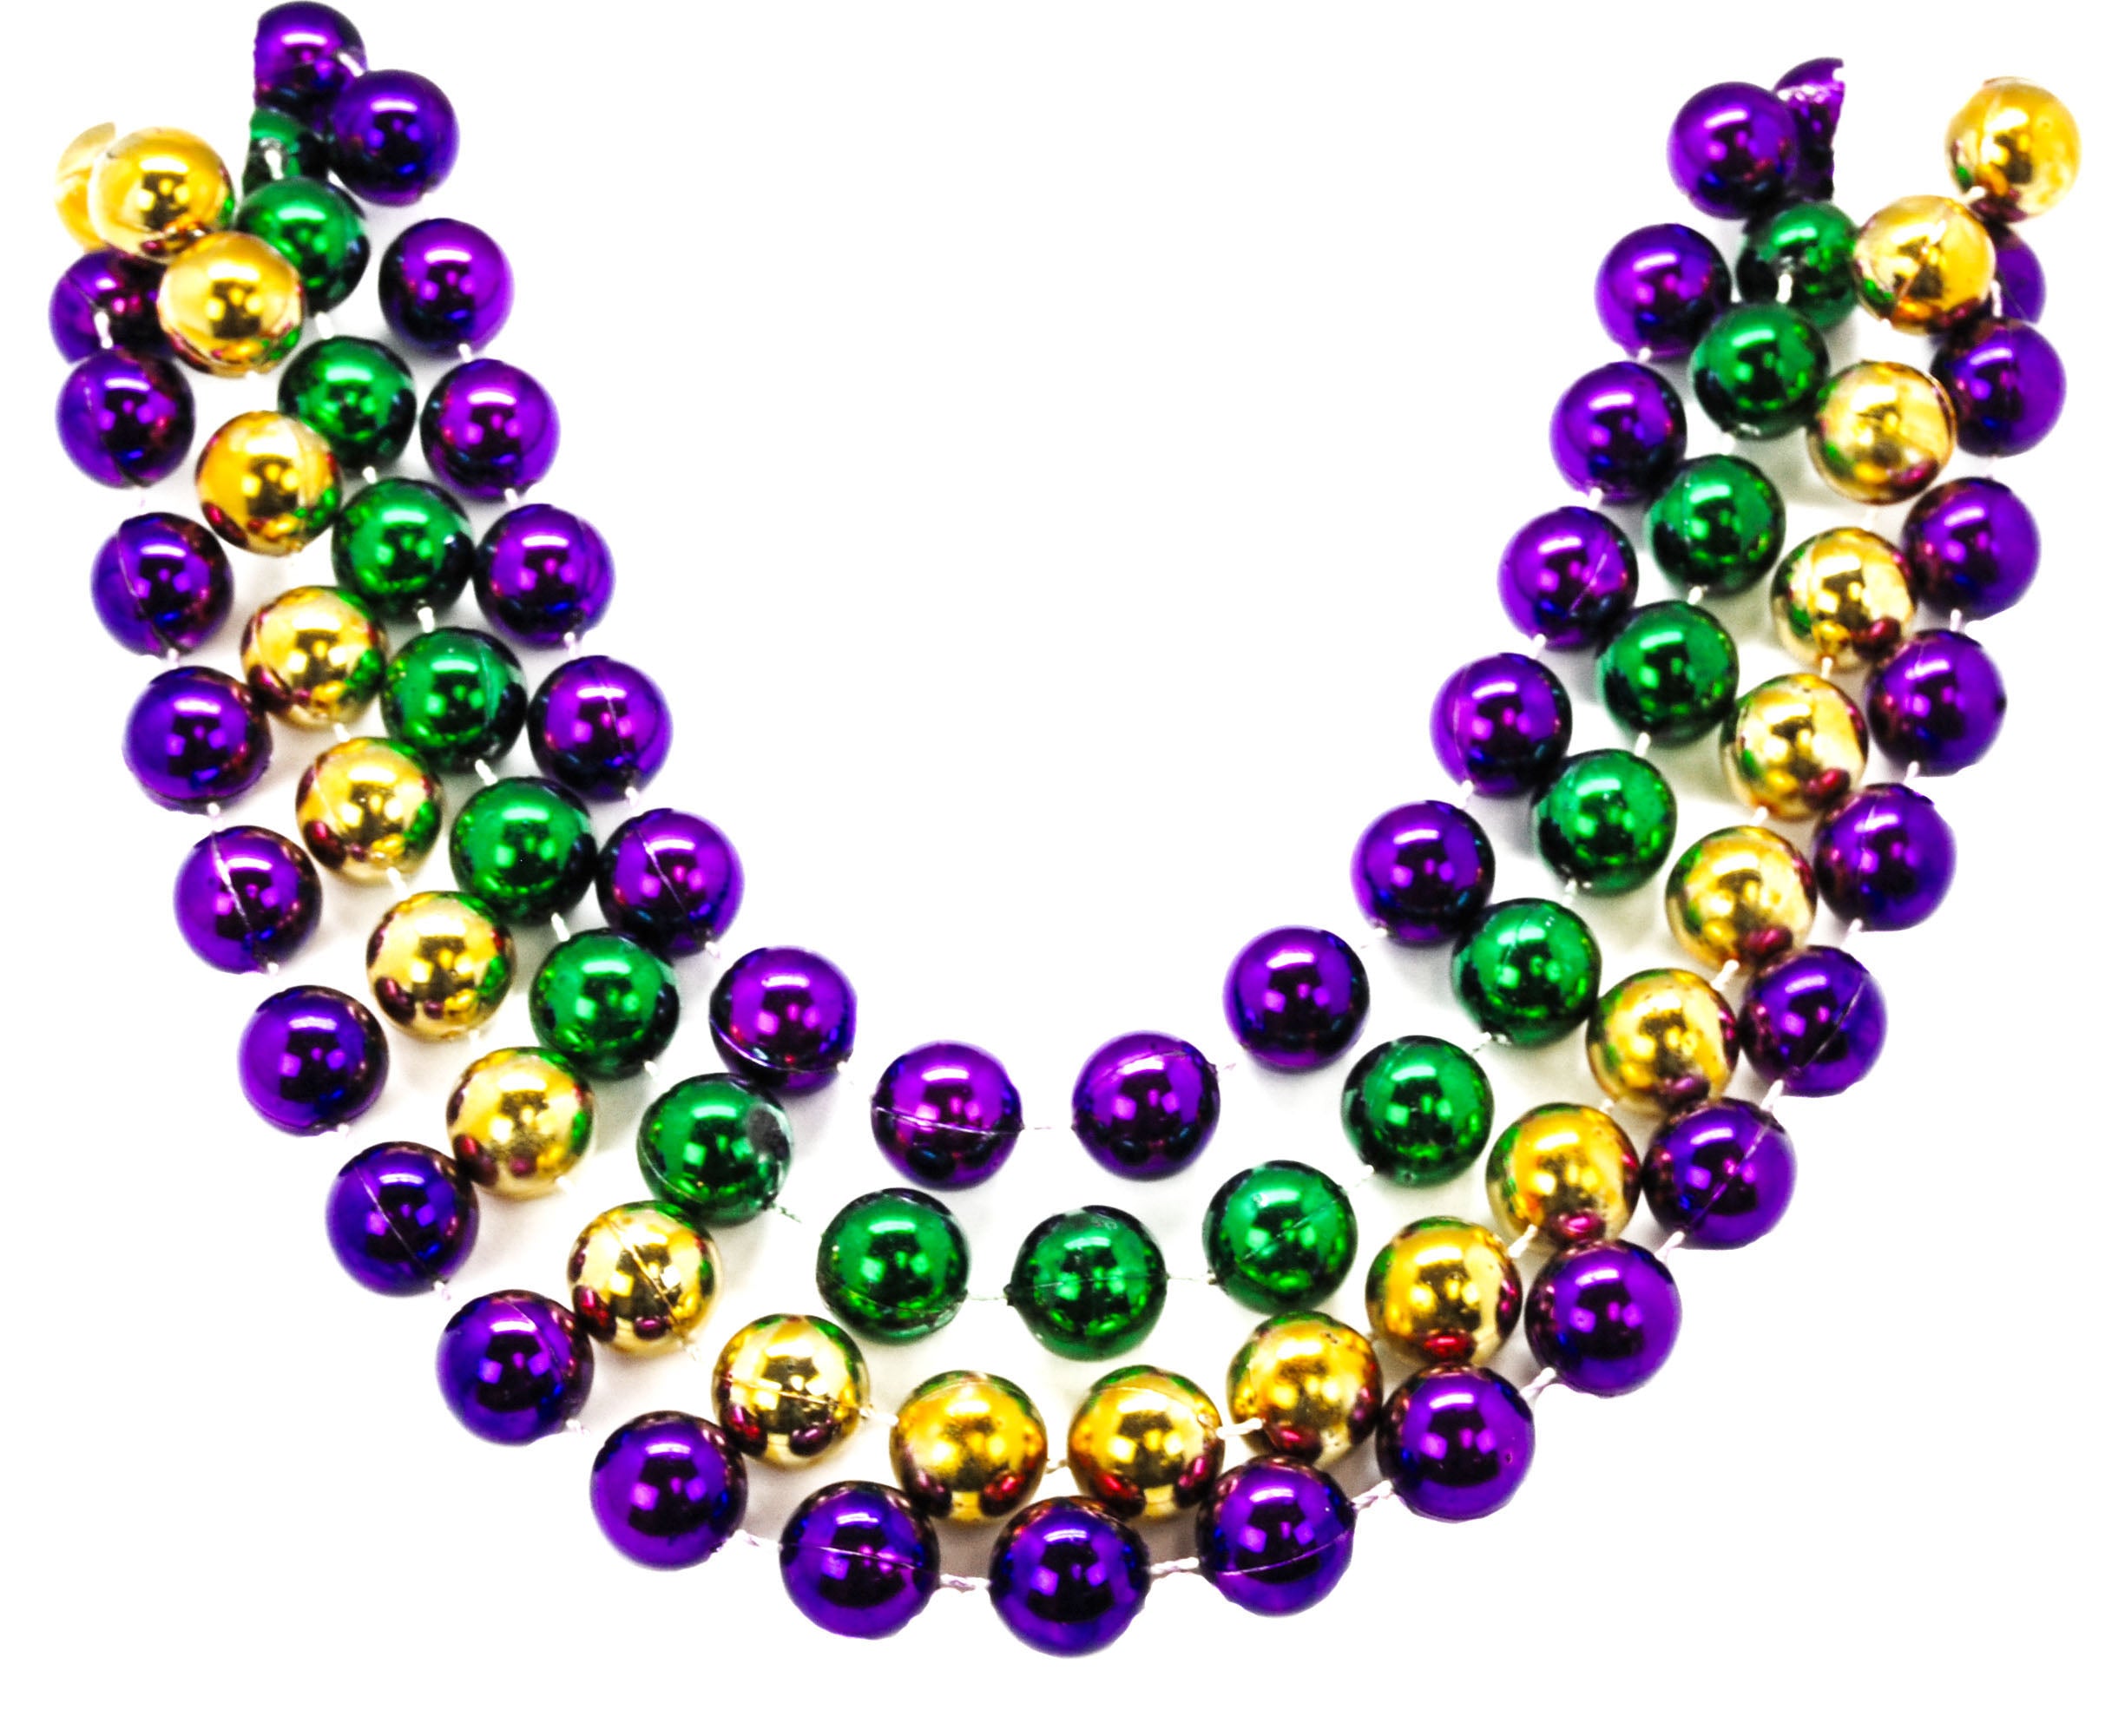 72" 18mm Round Beads Purple, Green, and Gold